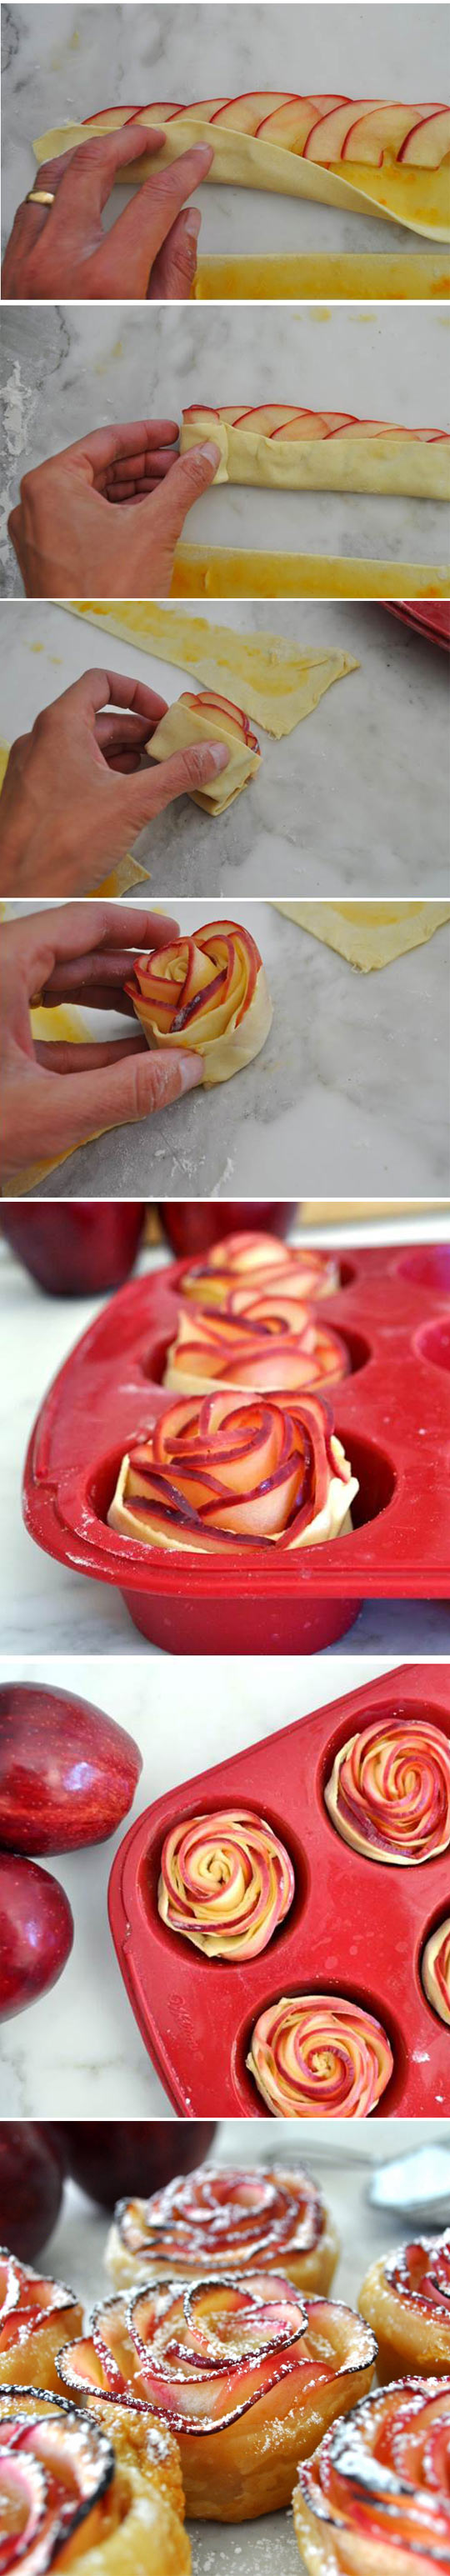 cool-apple-rose-pie-delicious-sweet